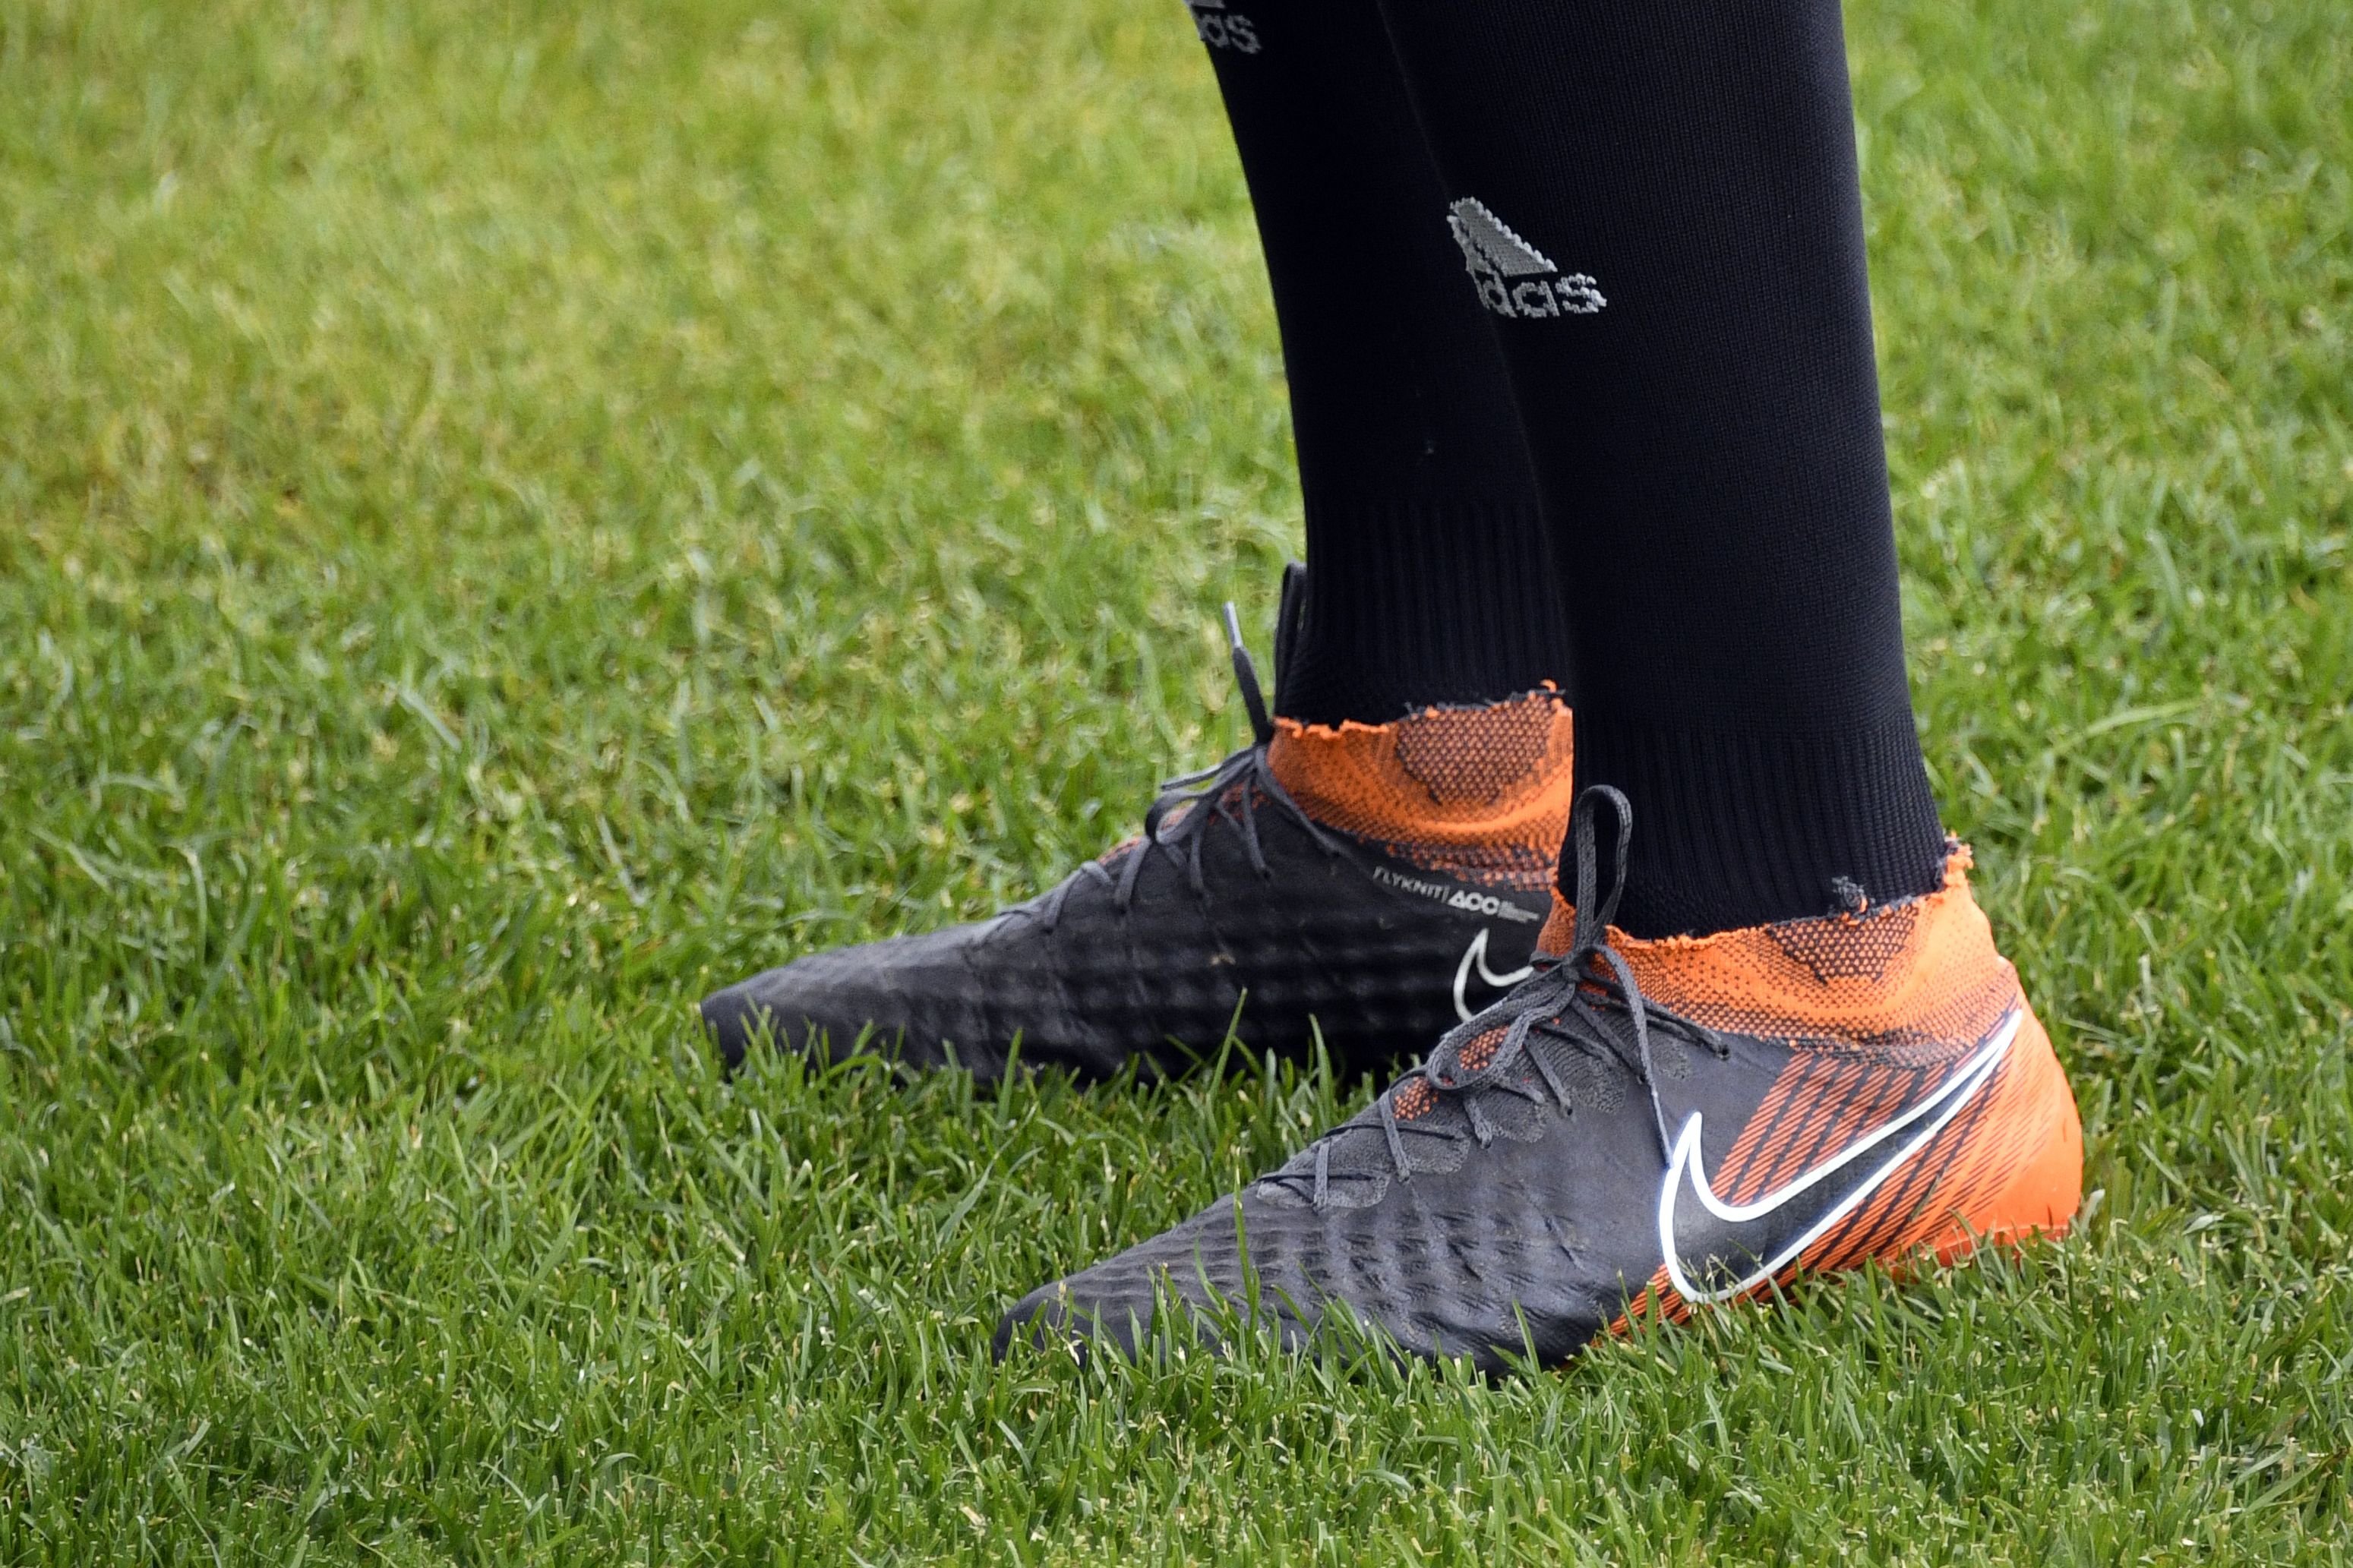 World Cup: Nike boots barred for Iran 